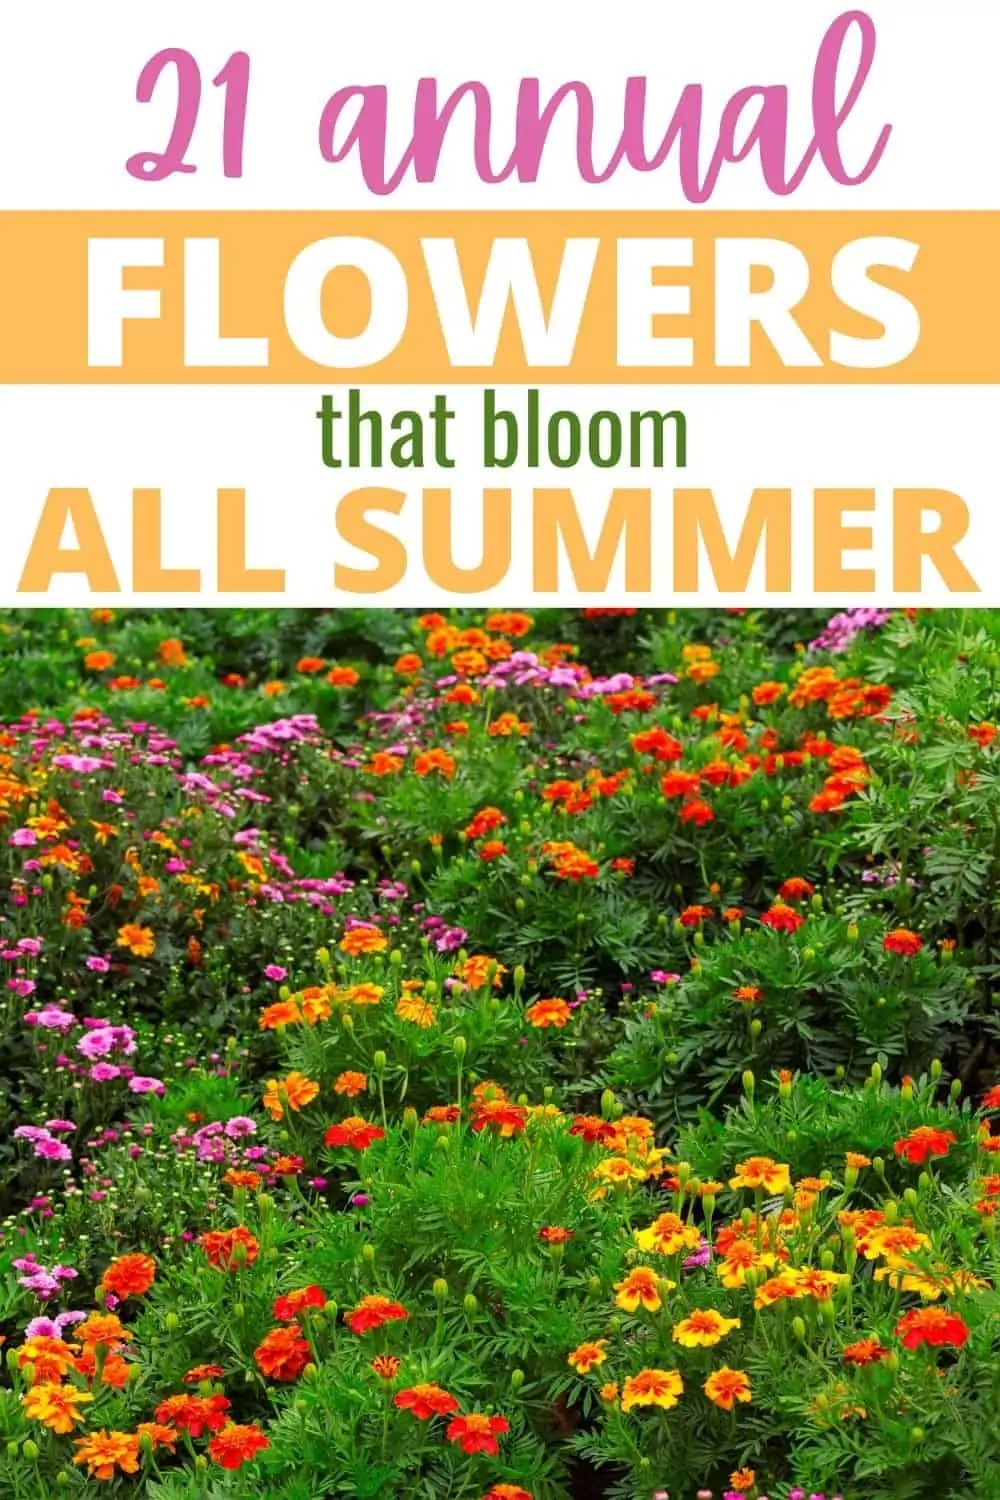 21 annual flowers that bloom all summer